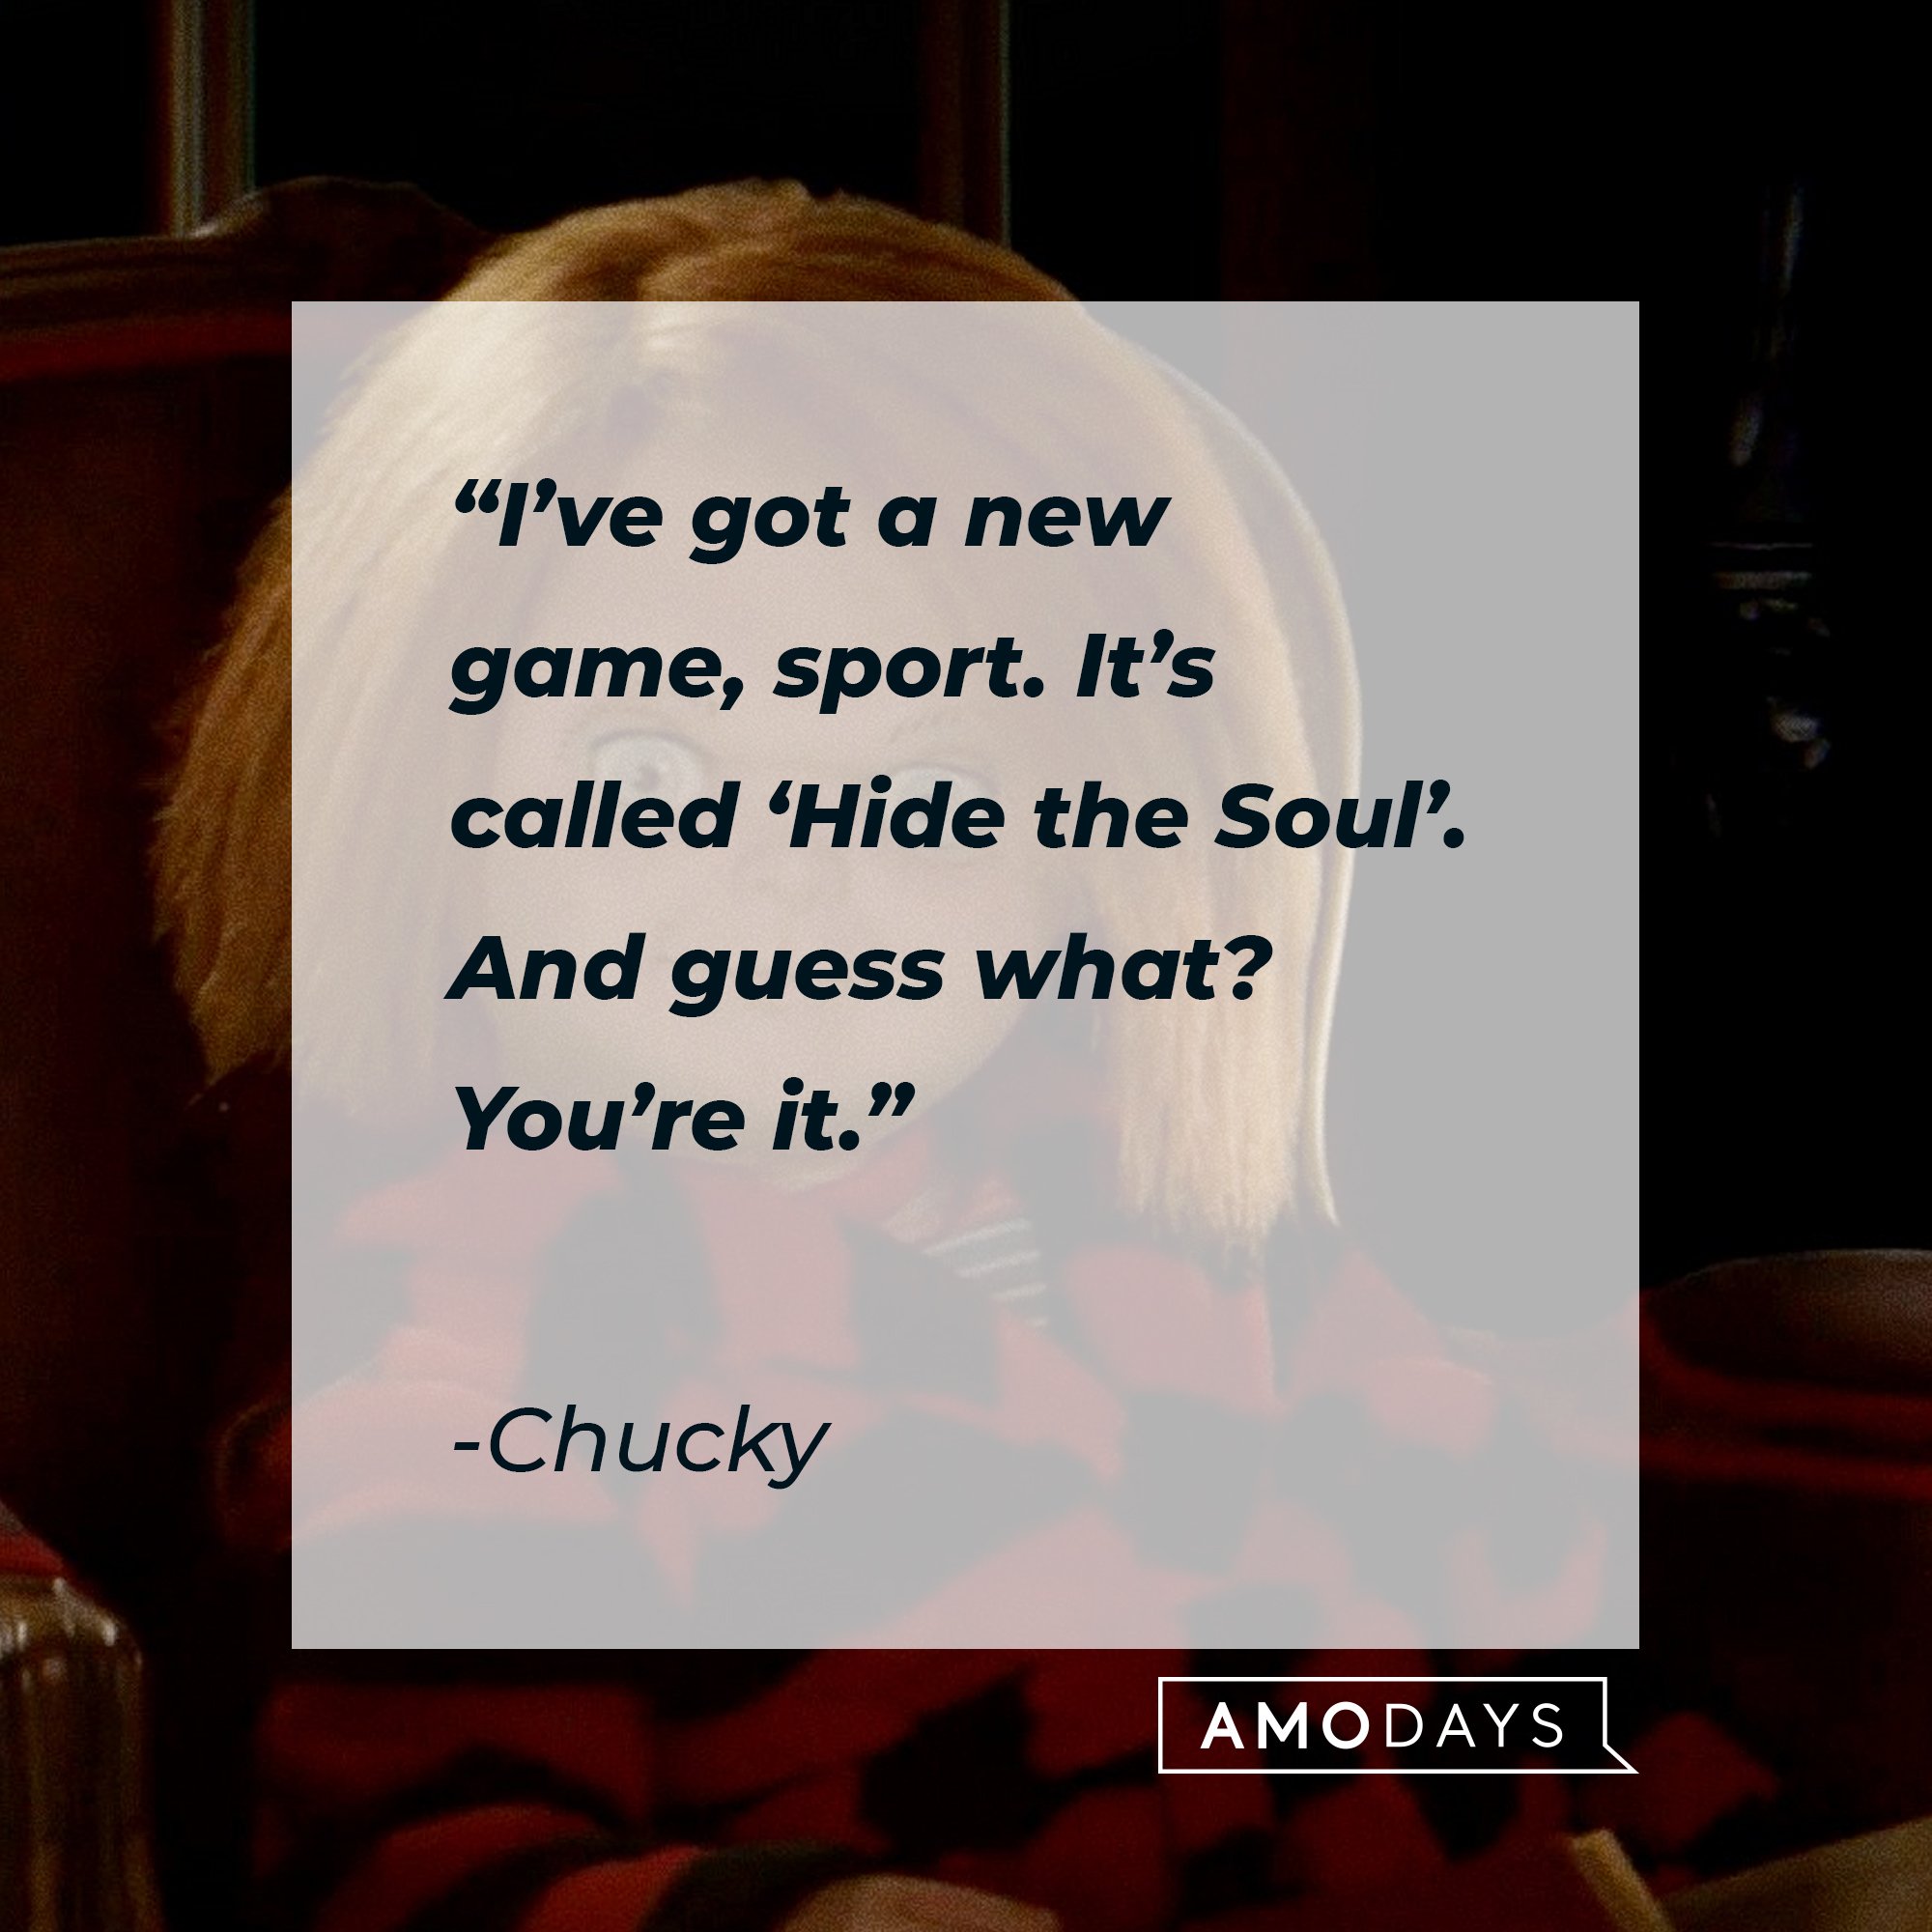 Chucky's quote: "I’ve got a new game, sport. It’s called ‘Hide the Soul.’ And guess what? You’re it.” | Image: AmoDays